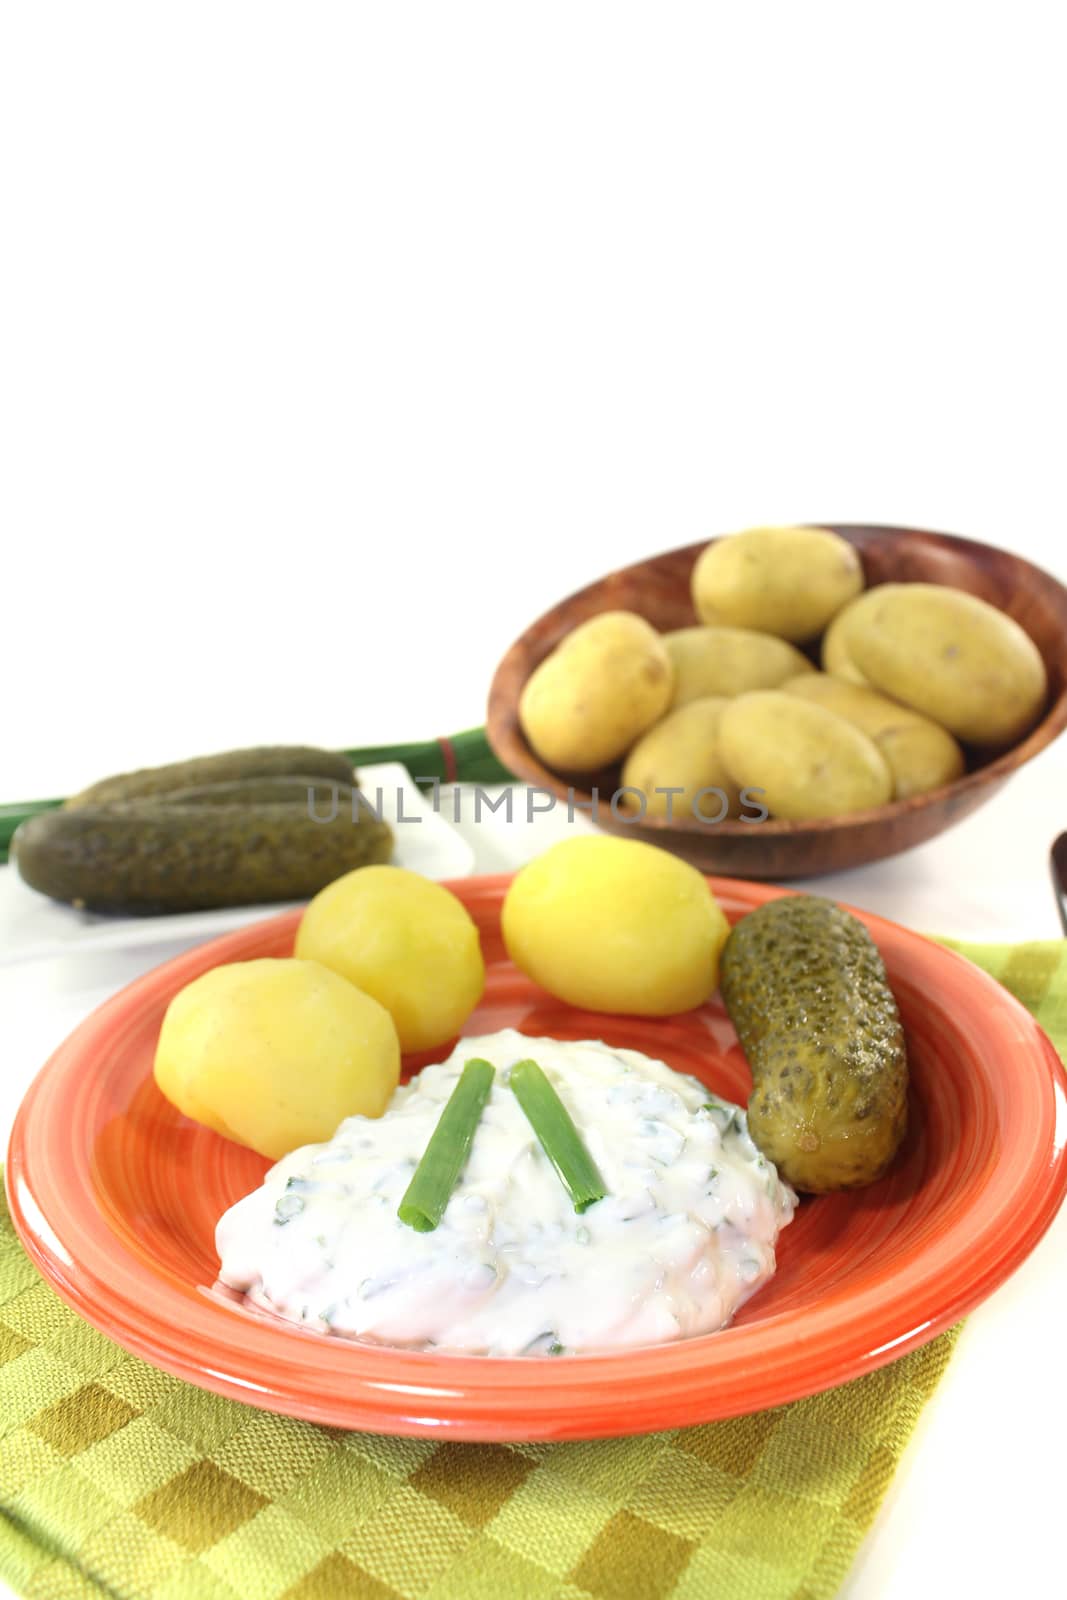 Potatoes with curd, pickles and chives on a light background